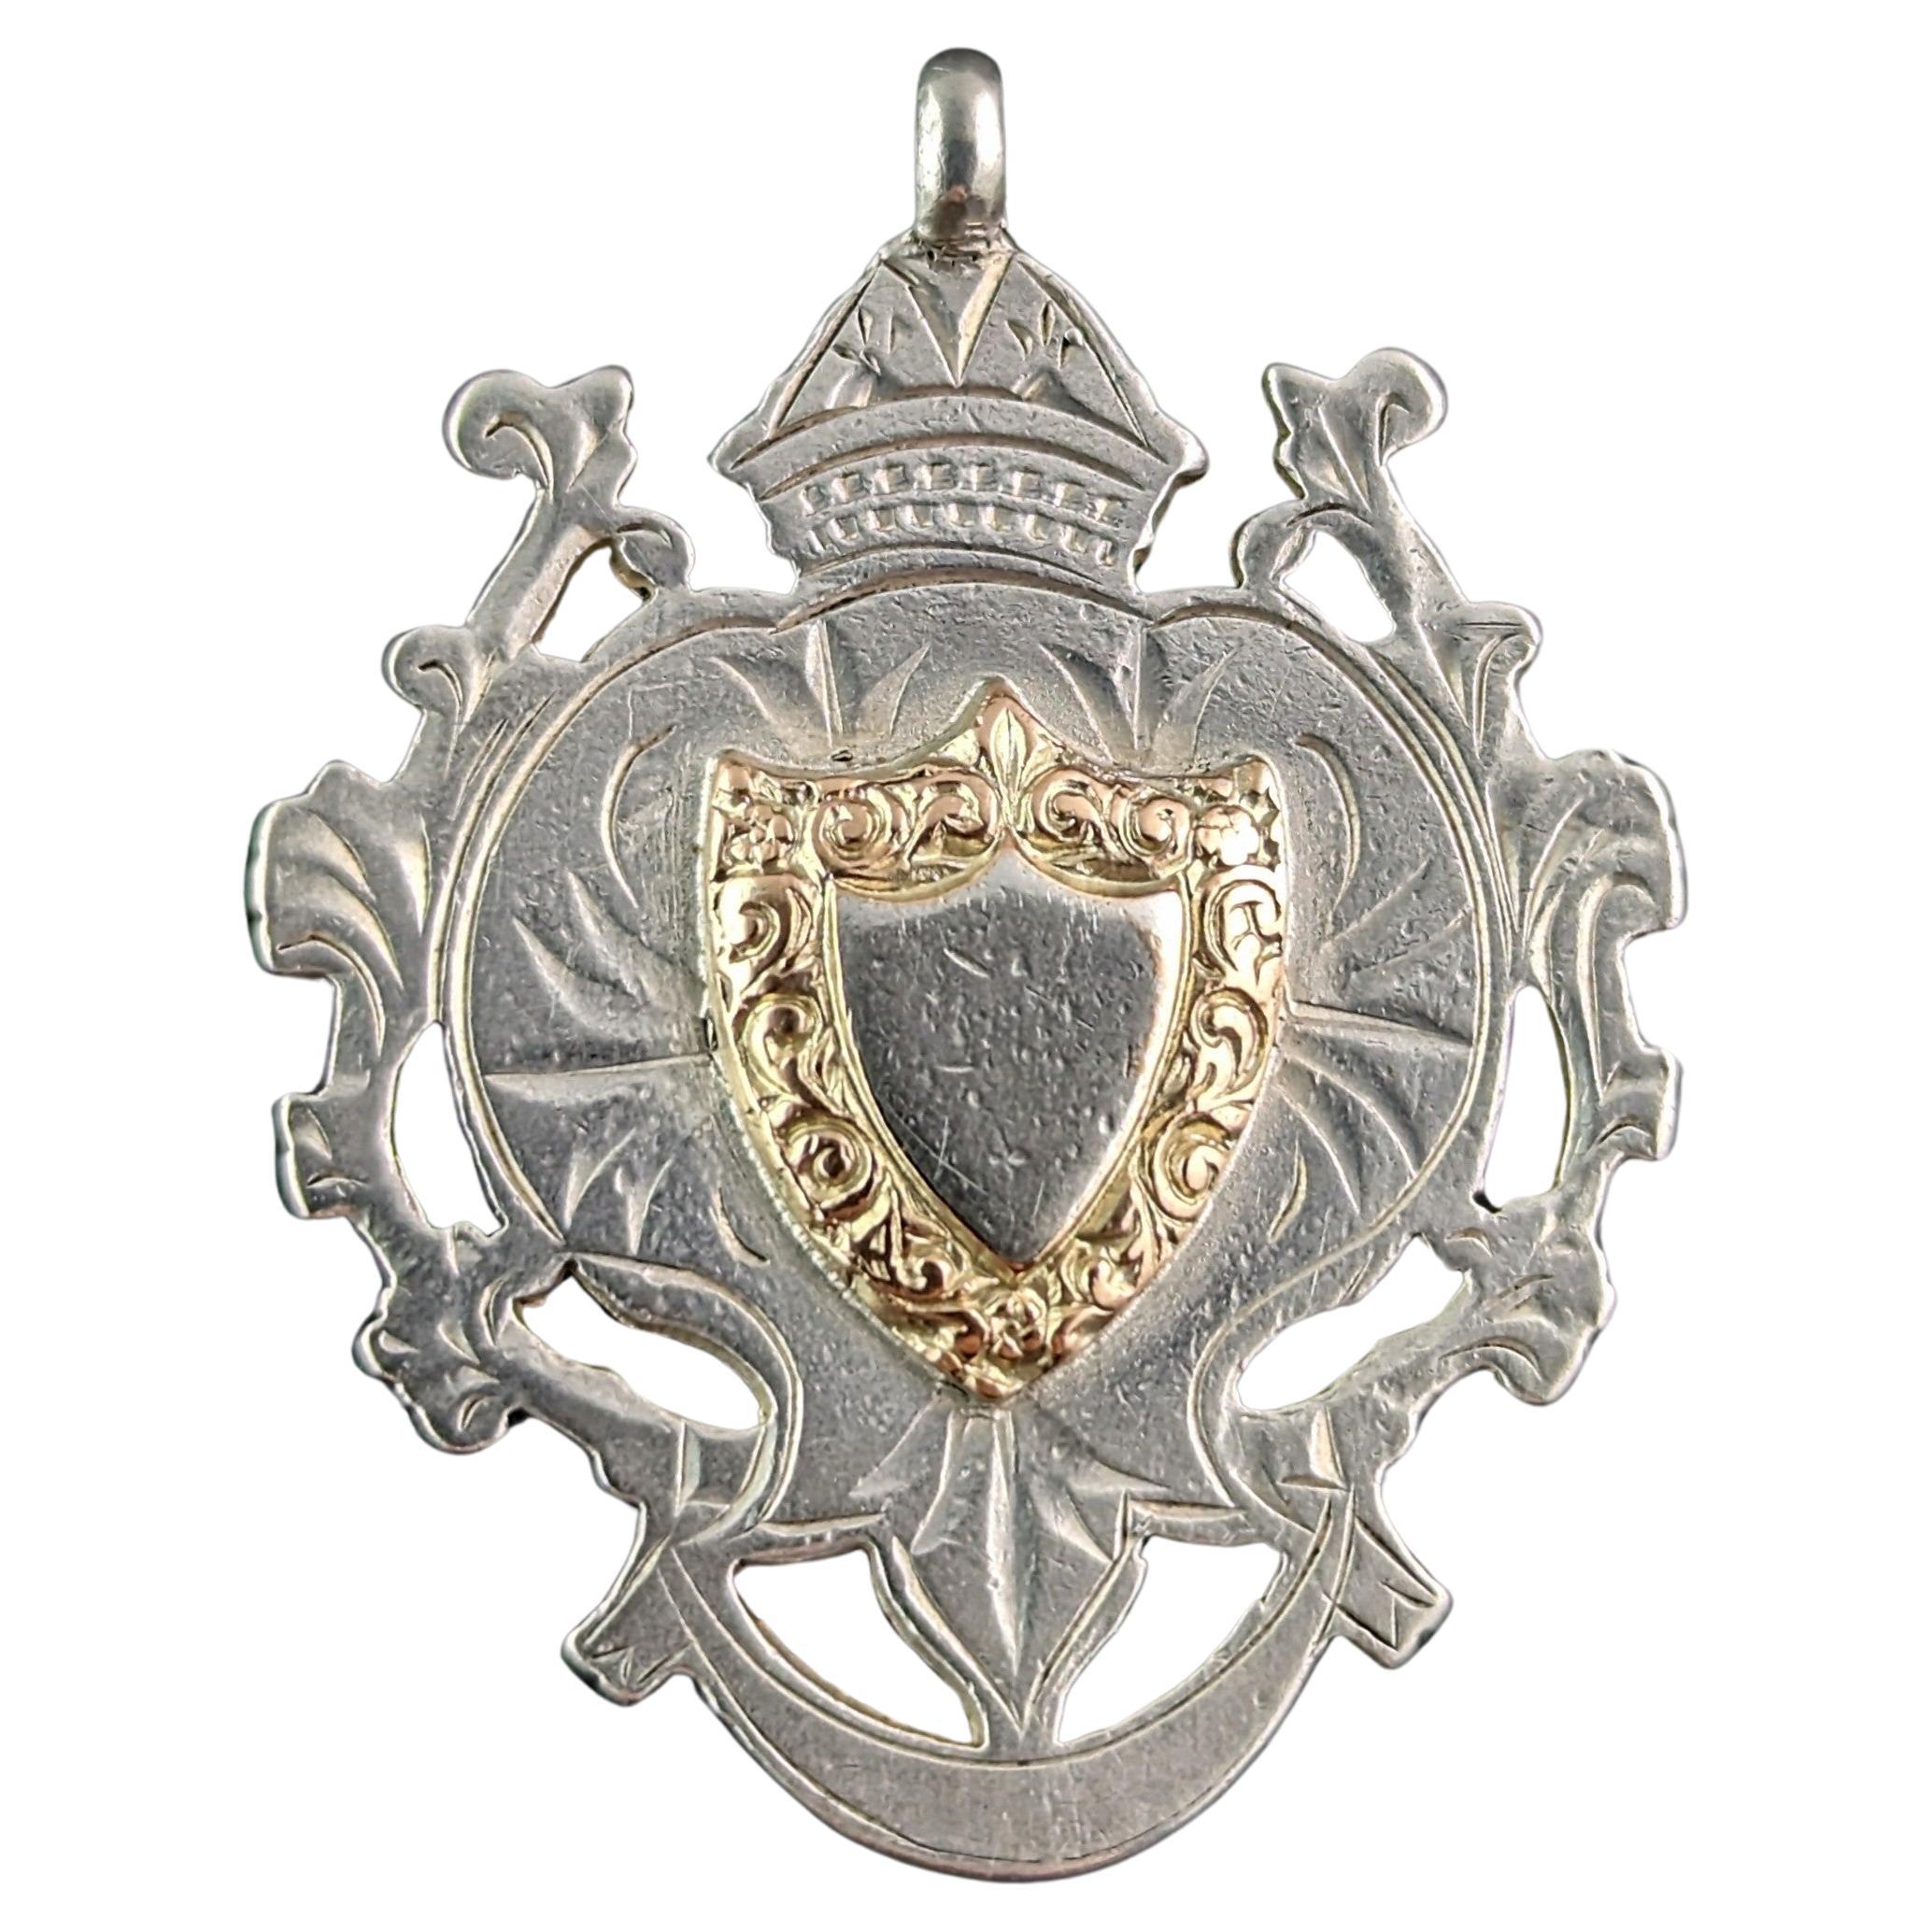 Antique sterling silver and 9k gold shield fob pendant 